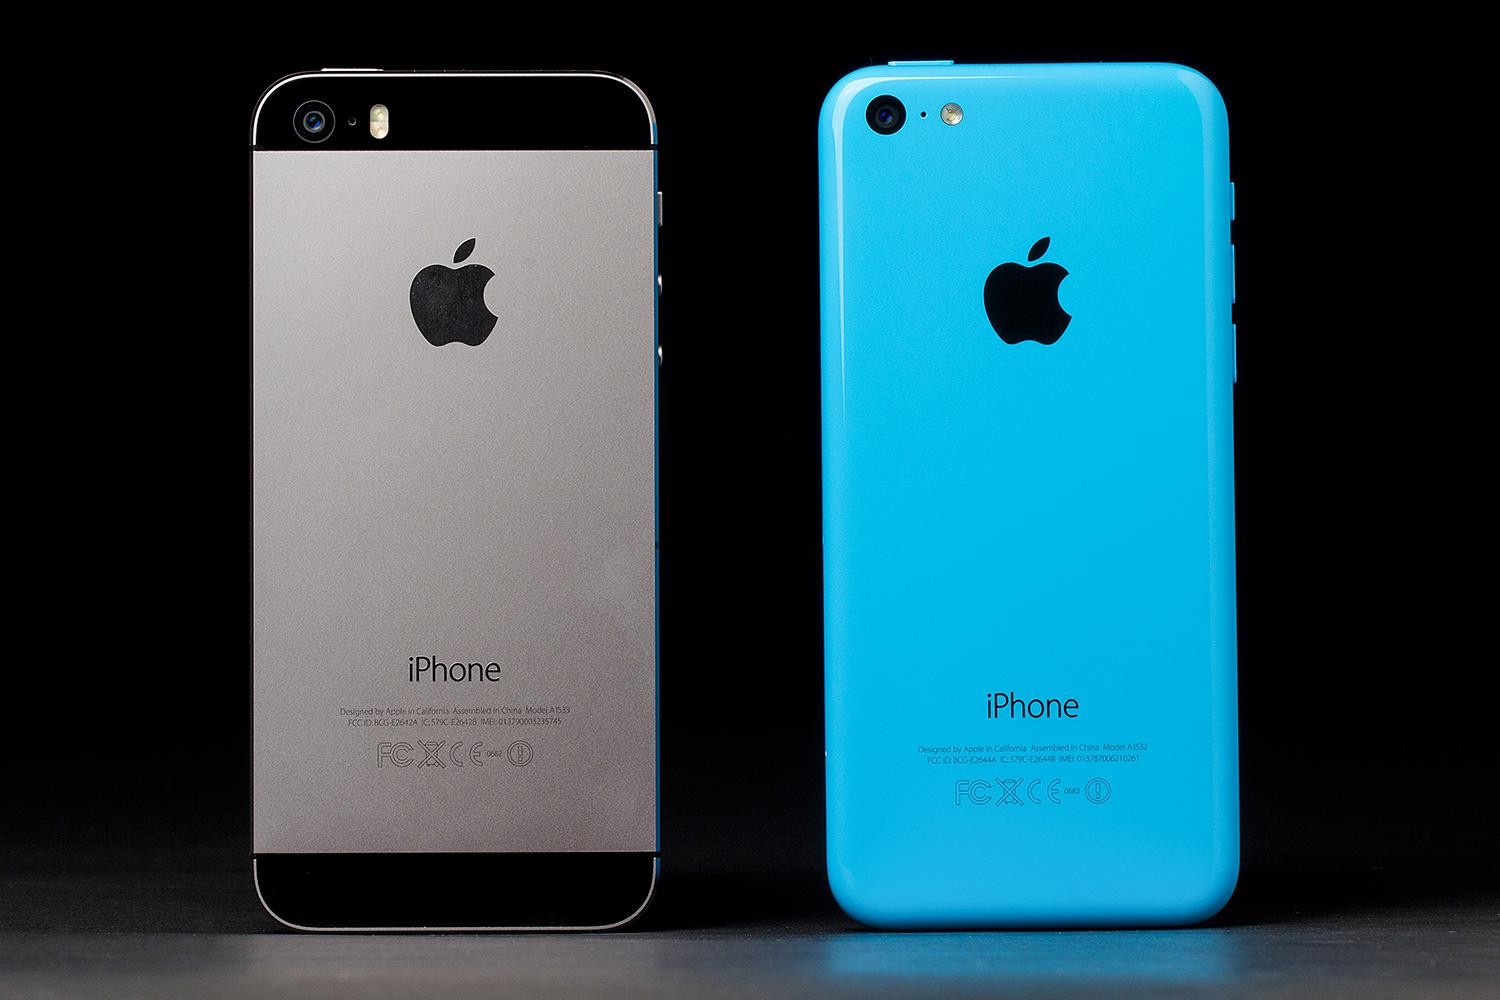 IPhone 5s vs. IPhone 5c | Knowledge is Power